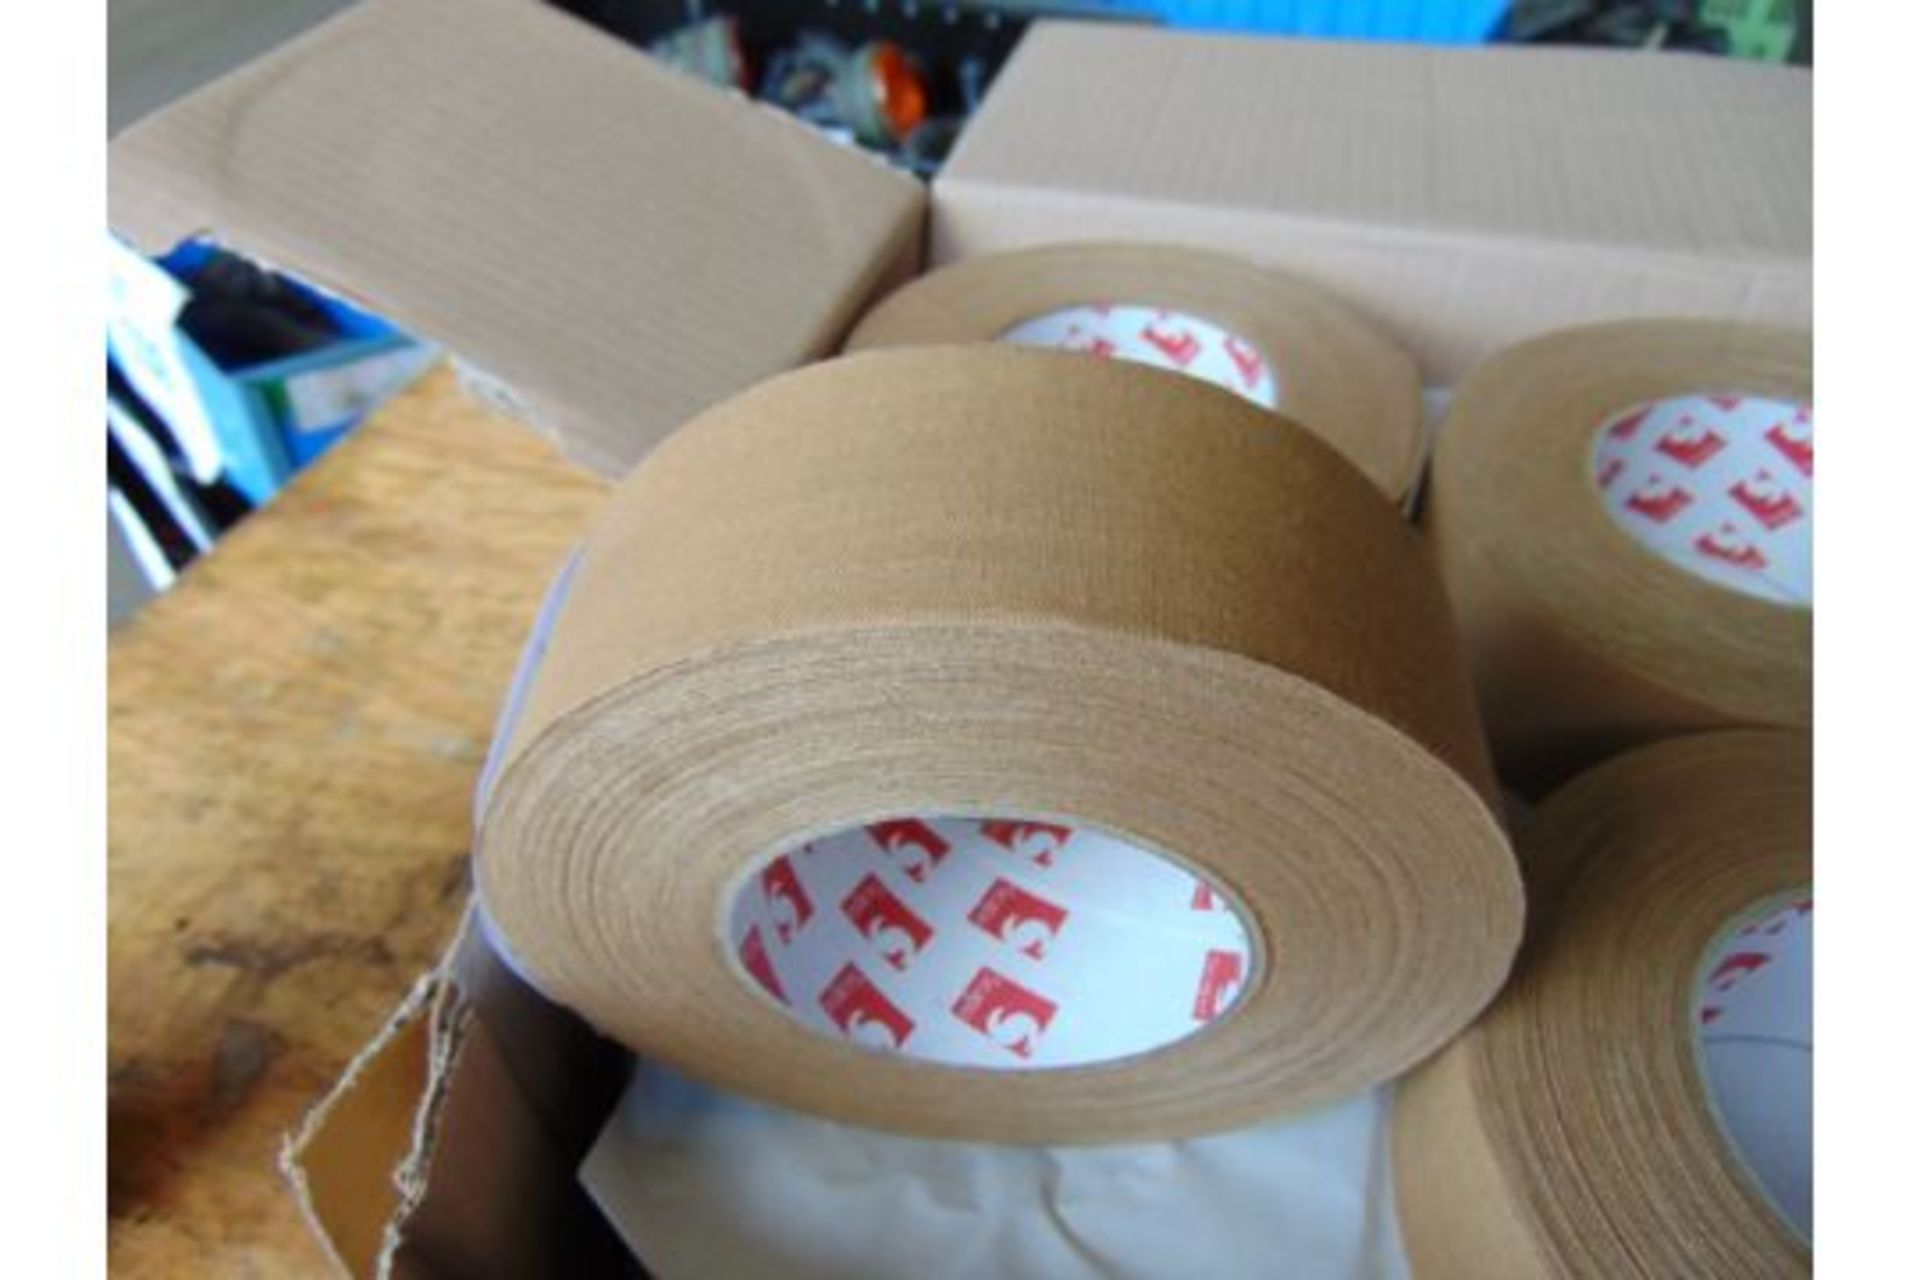 New Unissued 16 Rolls Scapa Tape Butt Linen 50mm x 50m / Roll Cloth Tape Adessive